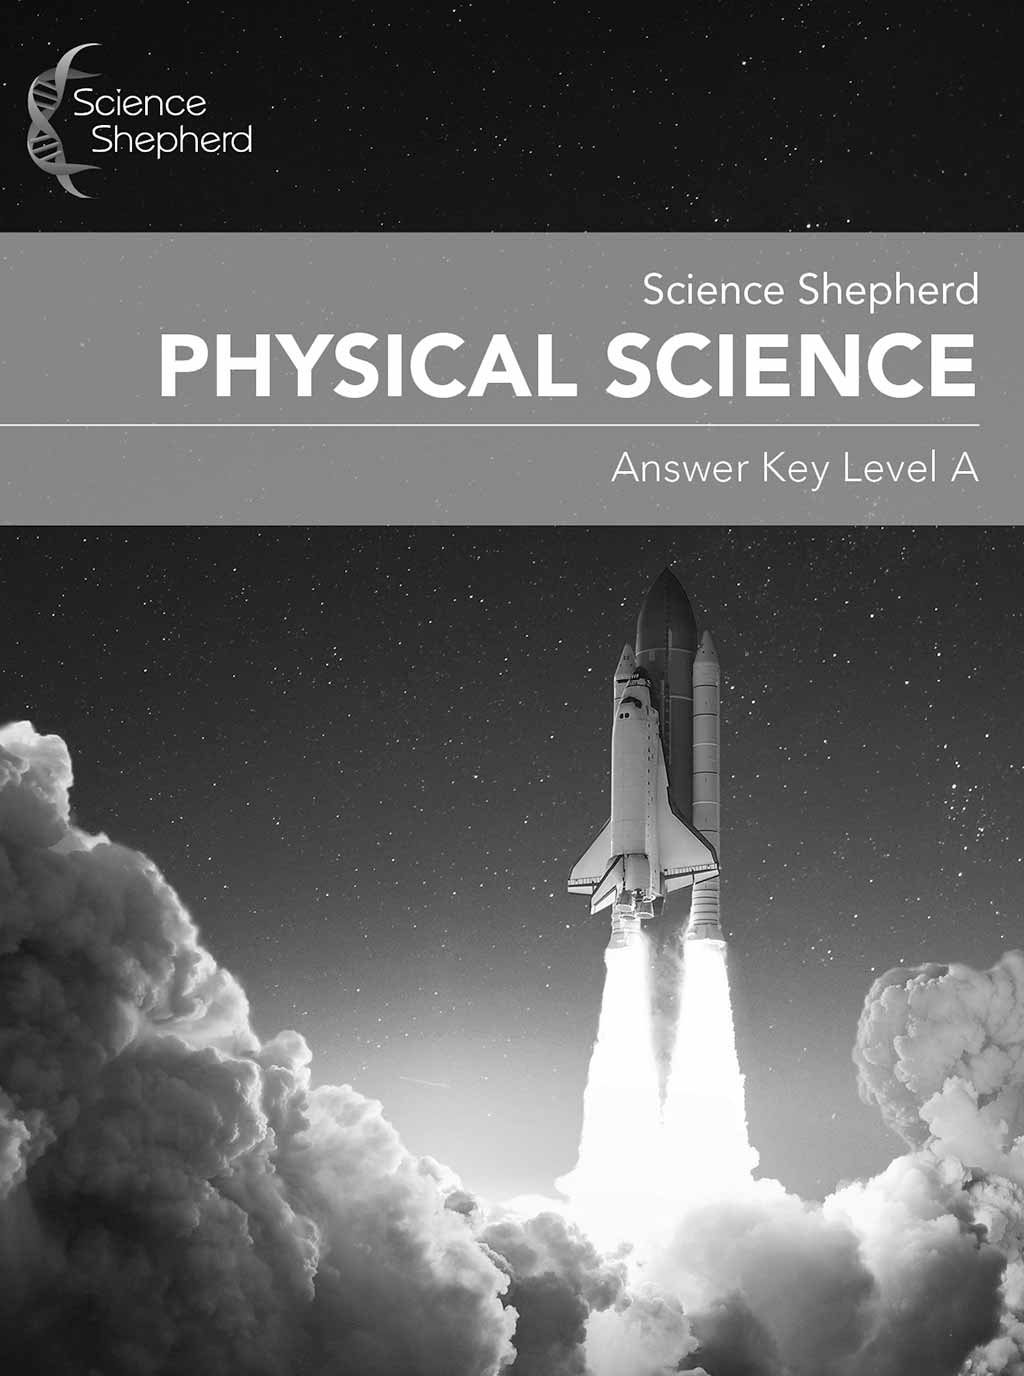 Physical Science 3rd to 5th grade homeschool science answer key Level A cover of a shuttle launch